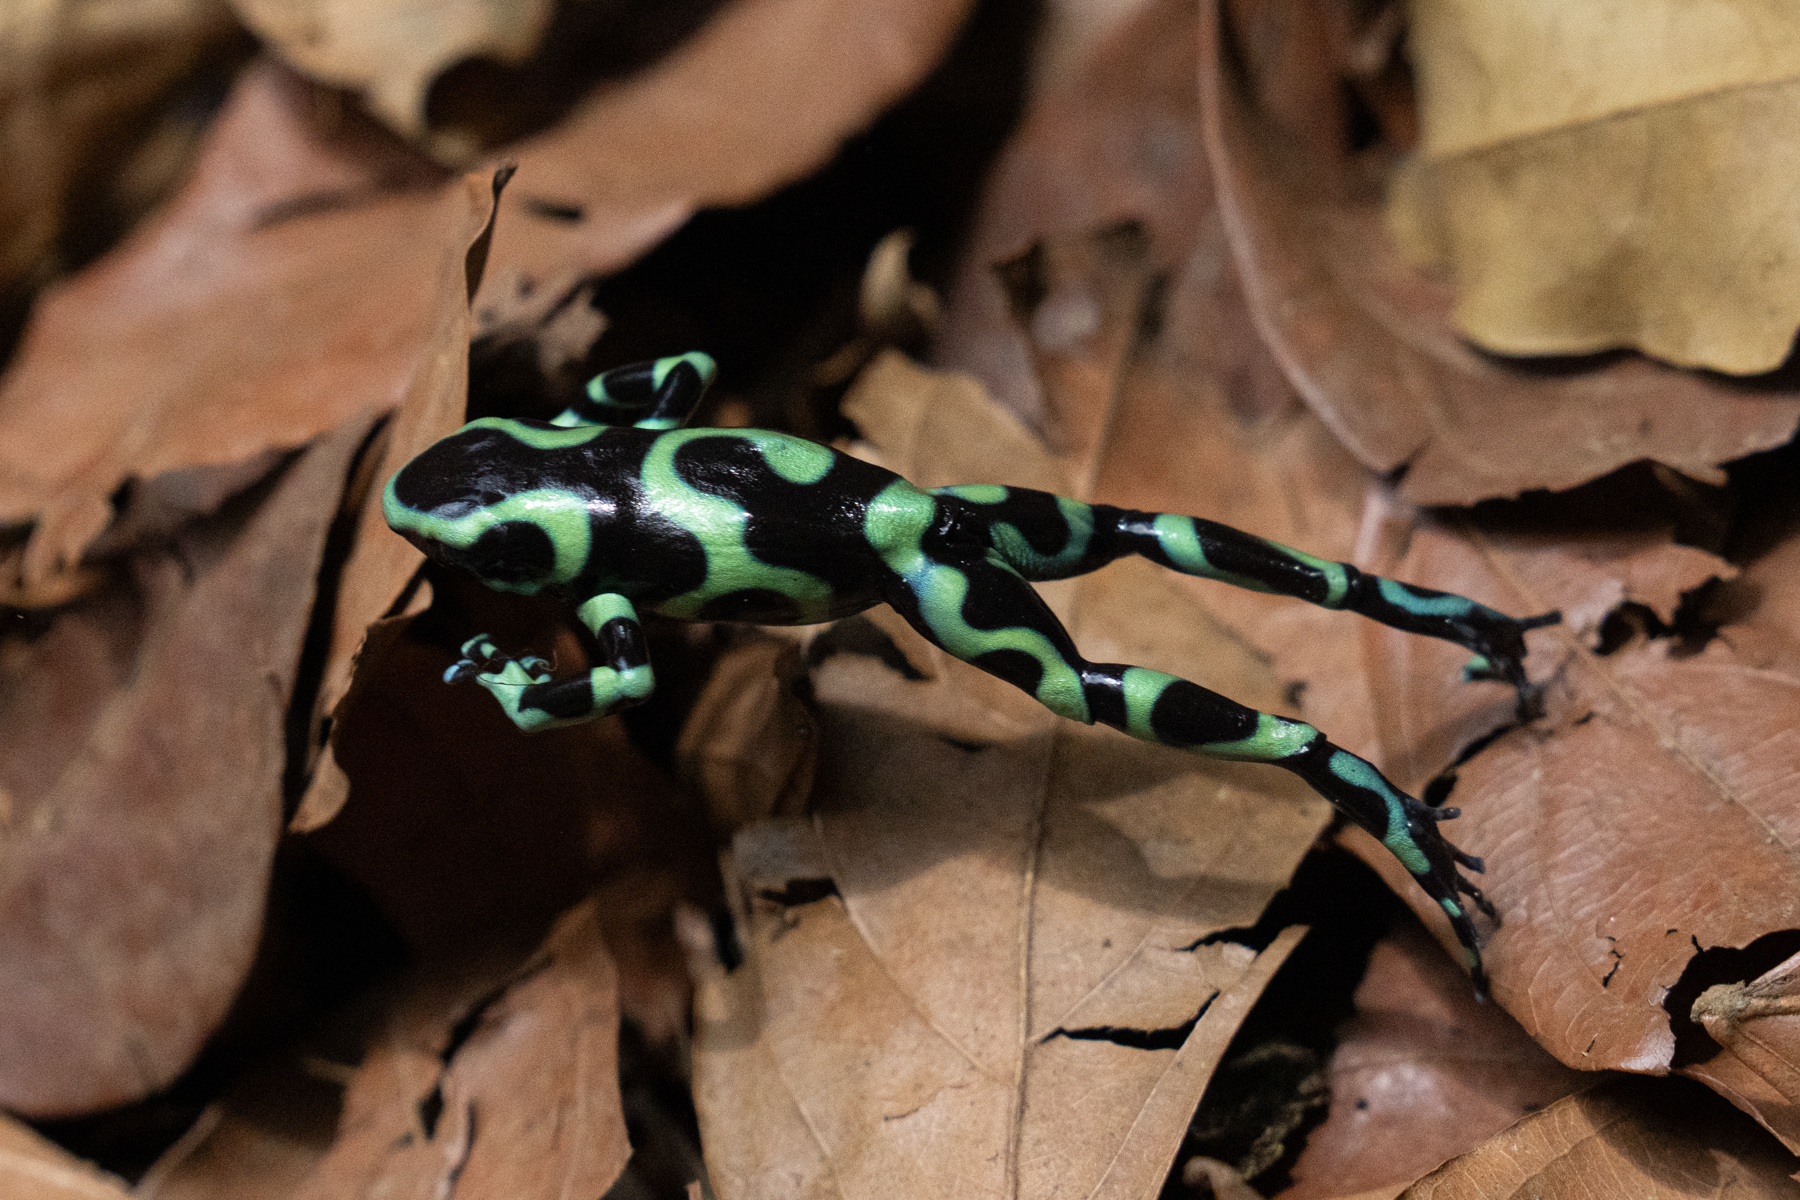 Stunning residents of the forest floor, tiny Green & Black Poison Dart frogs really make you watch your step in Costa Rica (image by Inger Vandyke)